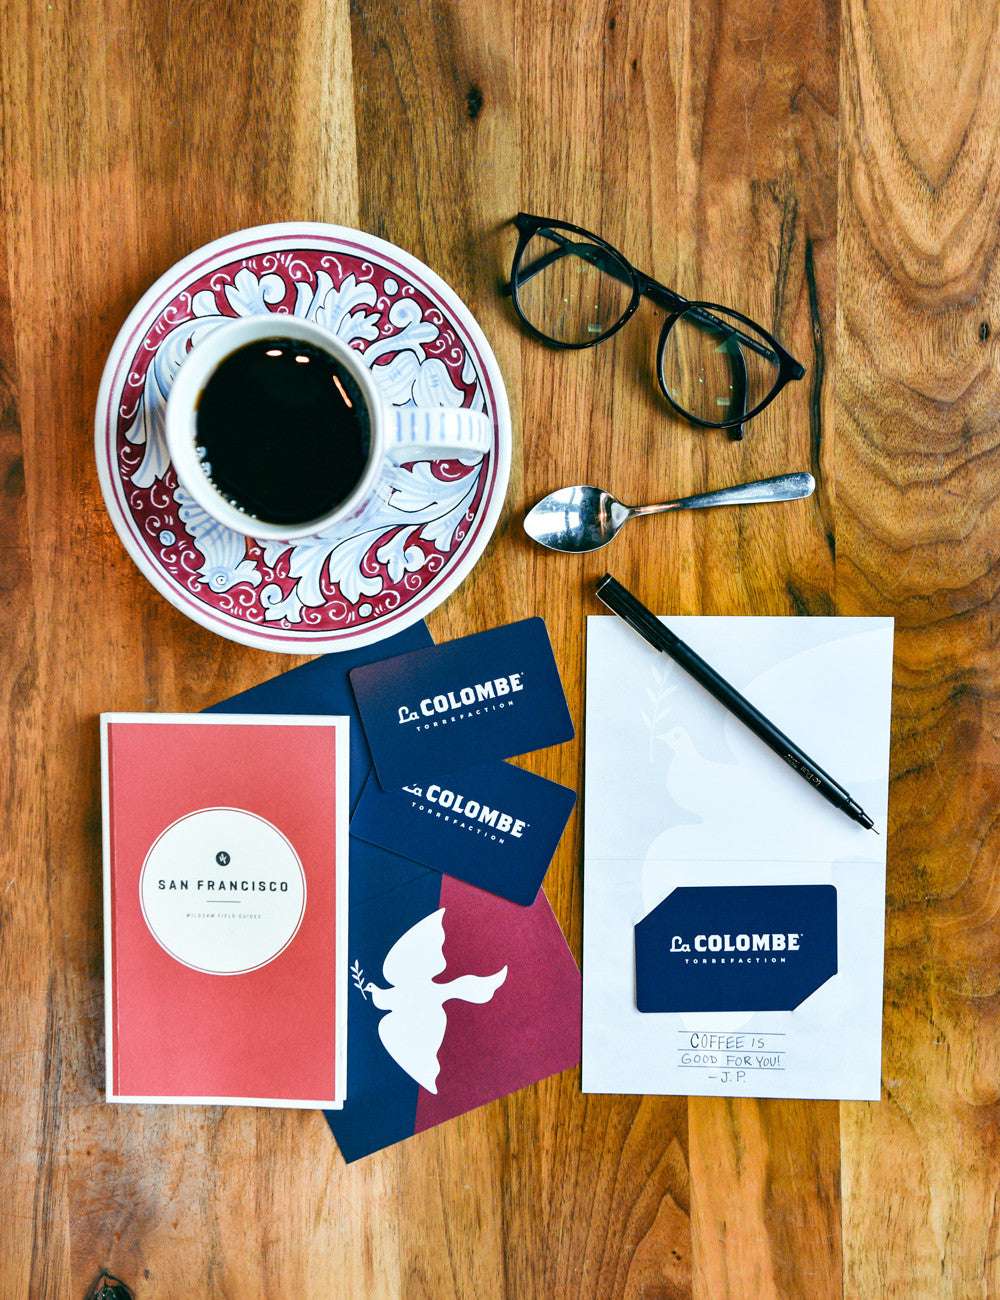 Top view of several La Colombe Gift Cards with a cup of coffee, a card, and a pair of glasses.